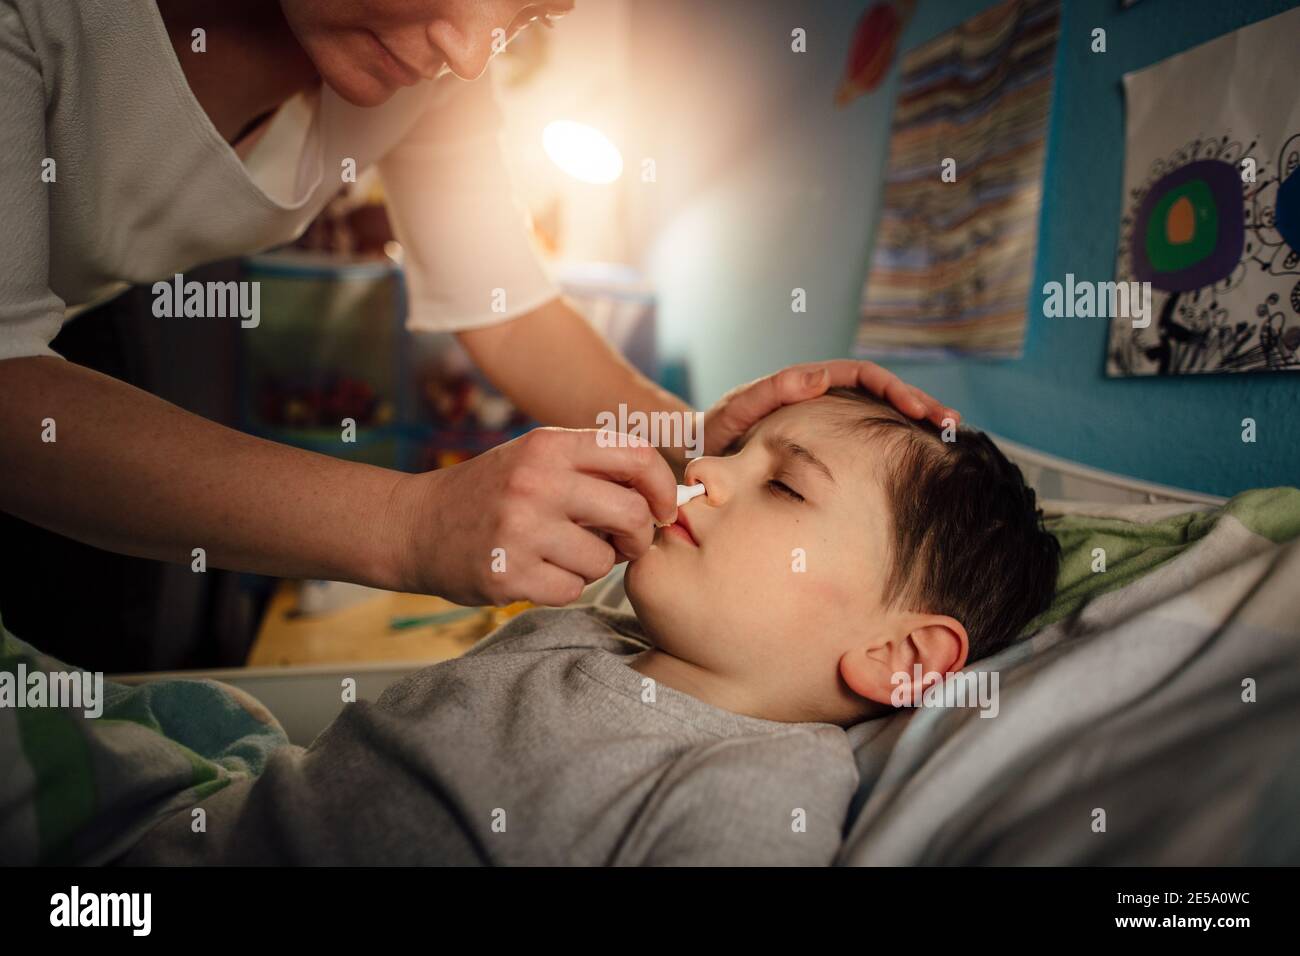 A sick child lying in bed with a stuffy nose. A mother clearing a blocked nose of her son in his bedroom at night. Stock Photo